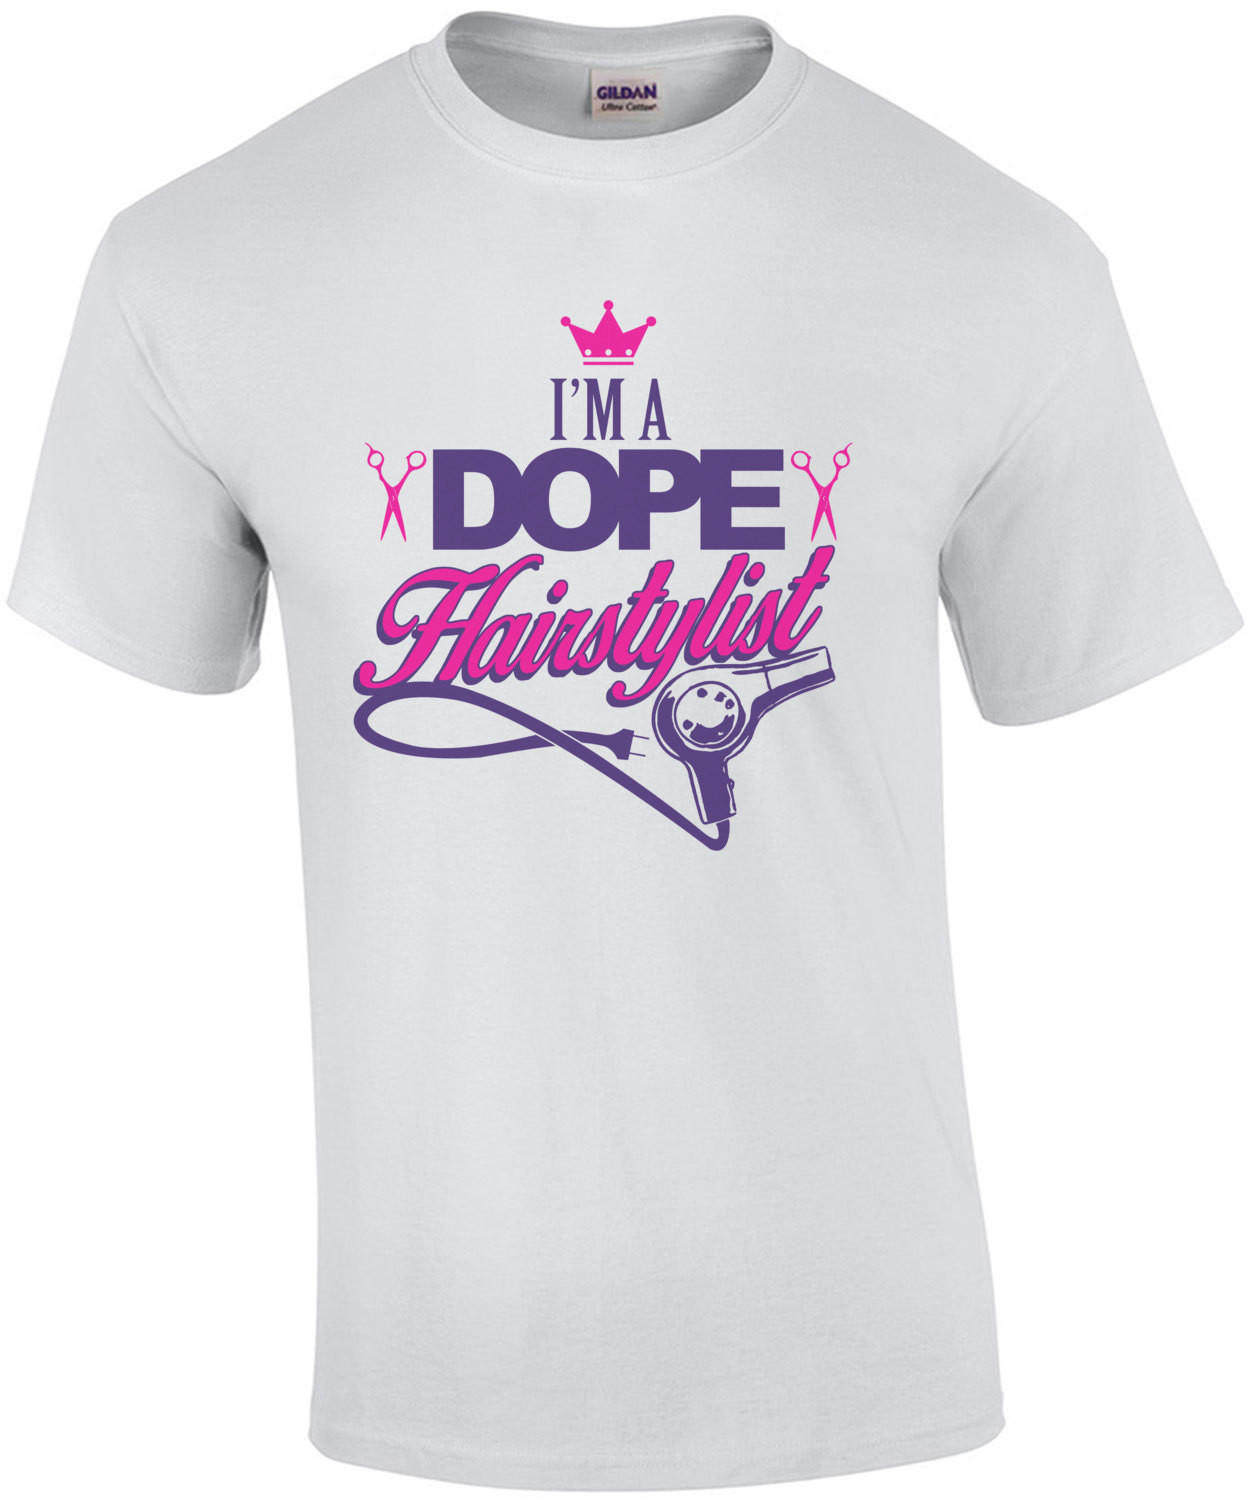 I'm A Dope Hairstylist T-Shirt